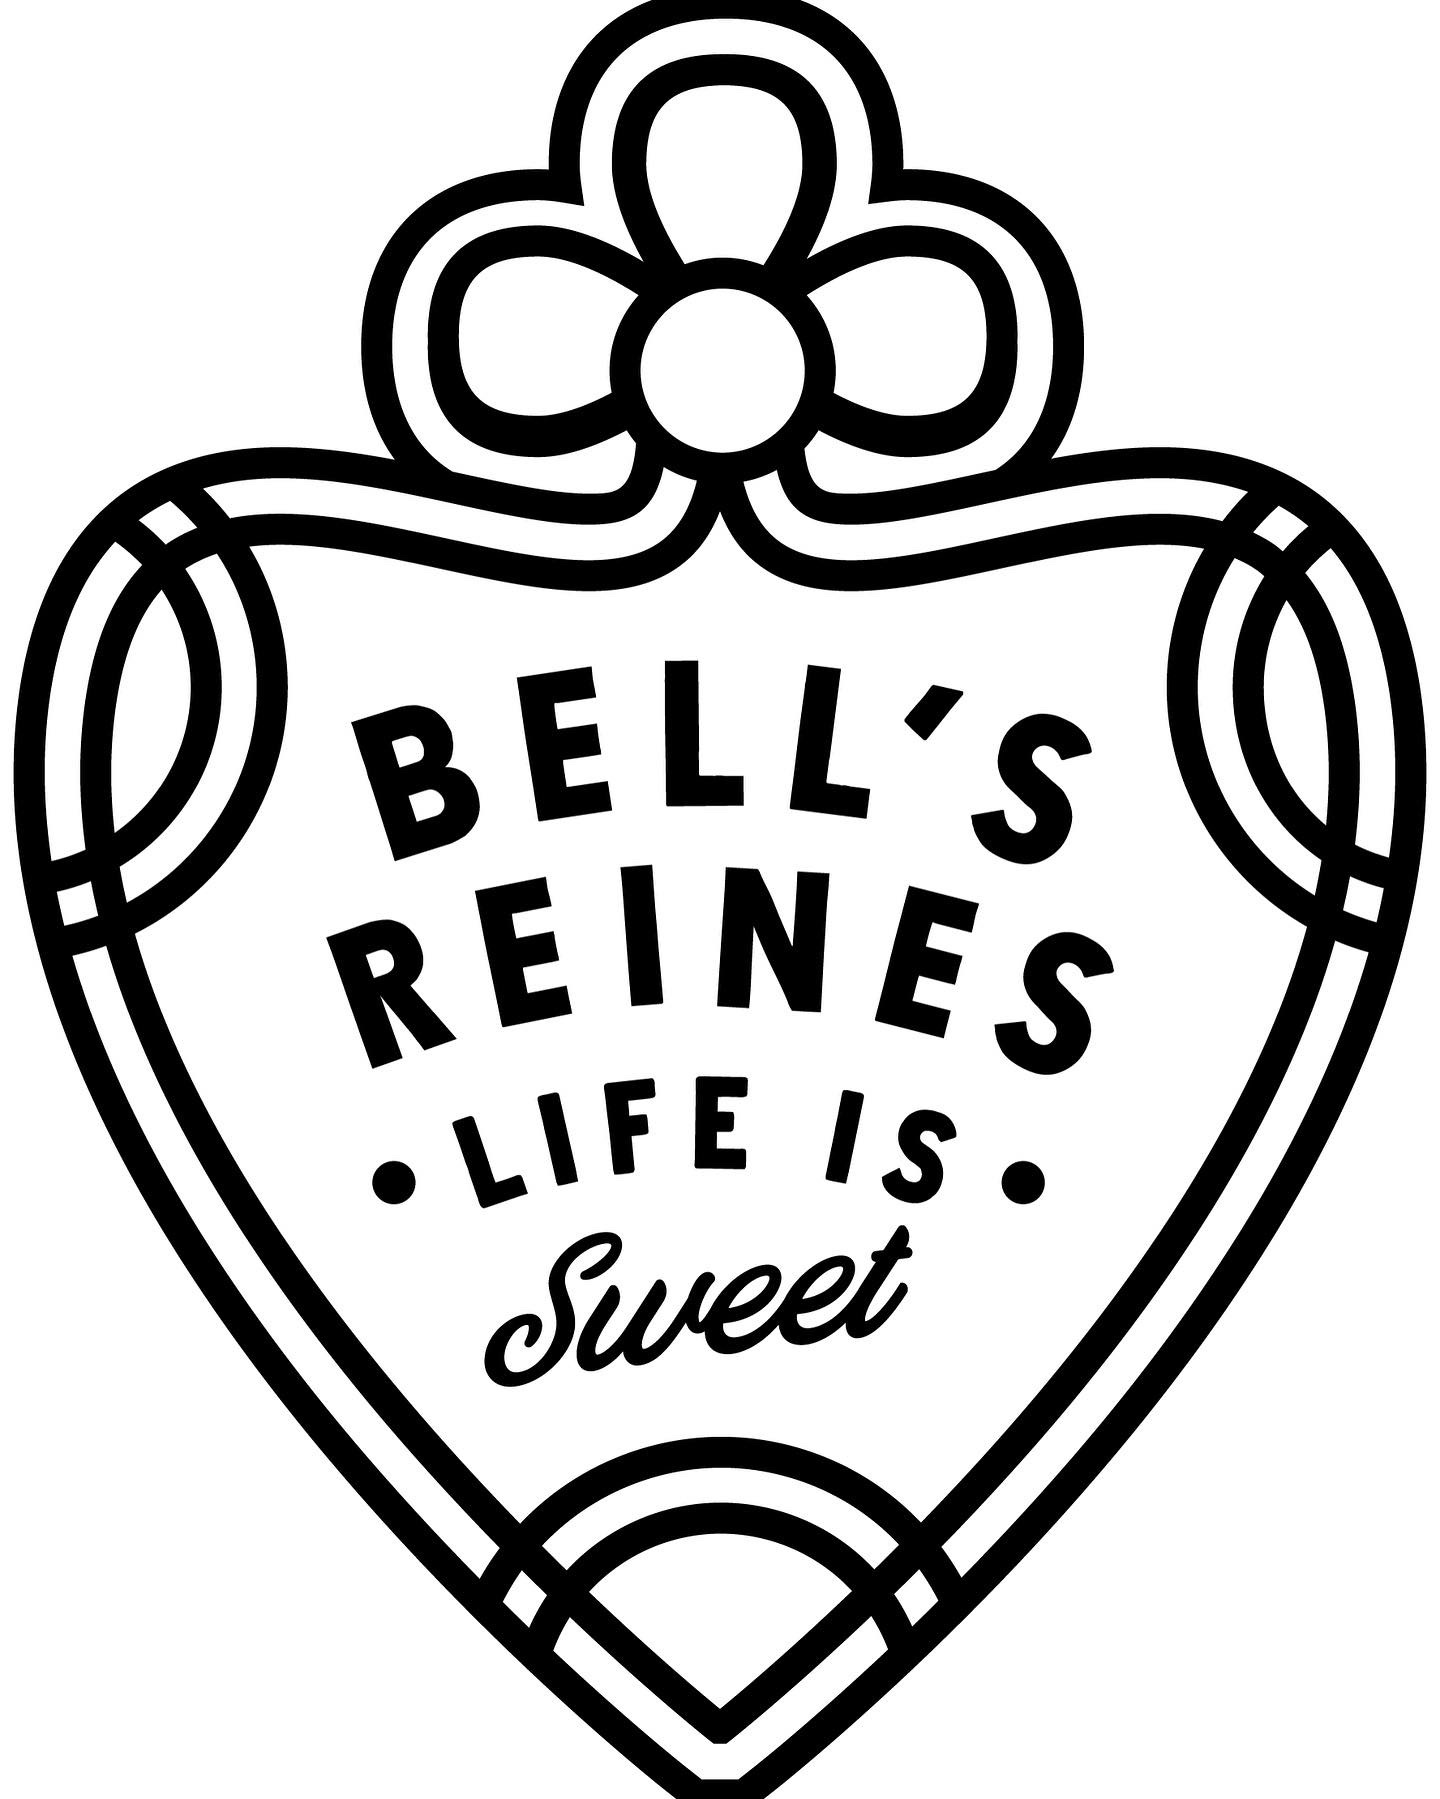 Bell's Reines Partners with Shop Made in D.C. to offer In-Store Purchases of Their Delicious Guilt-Free Cookies at 5 Physical Locations